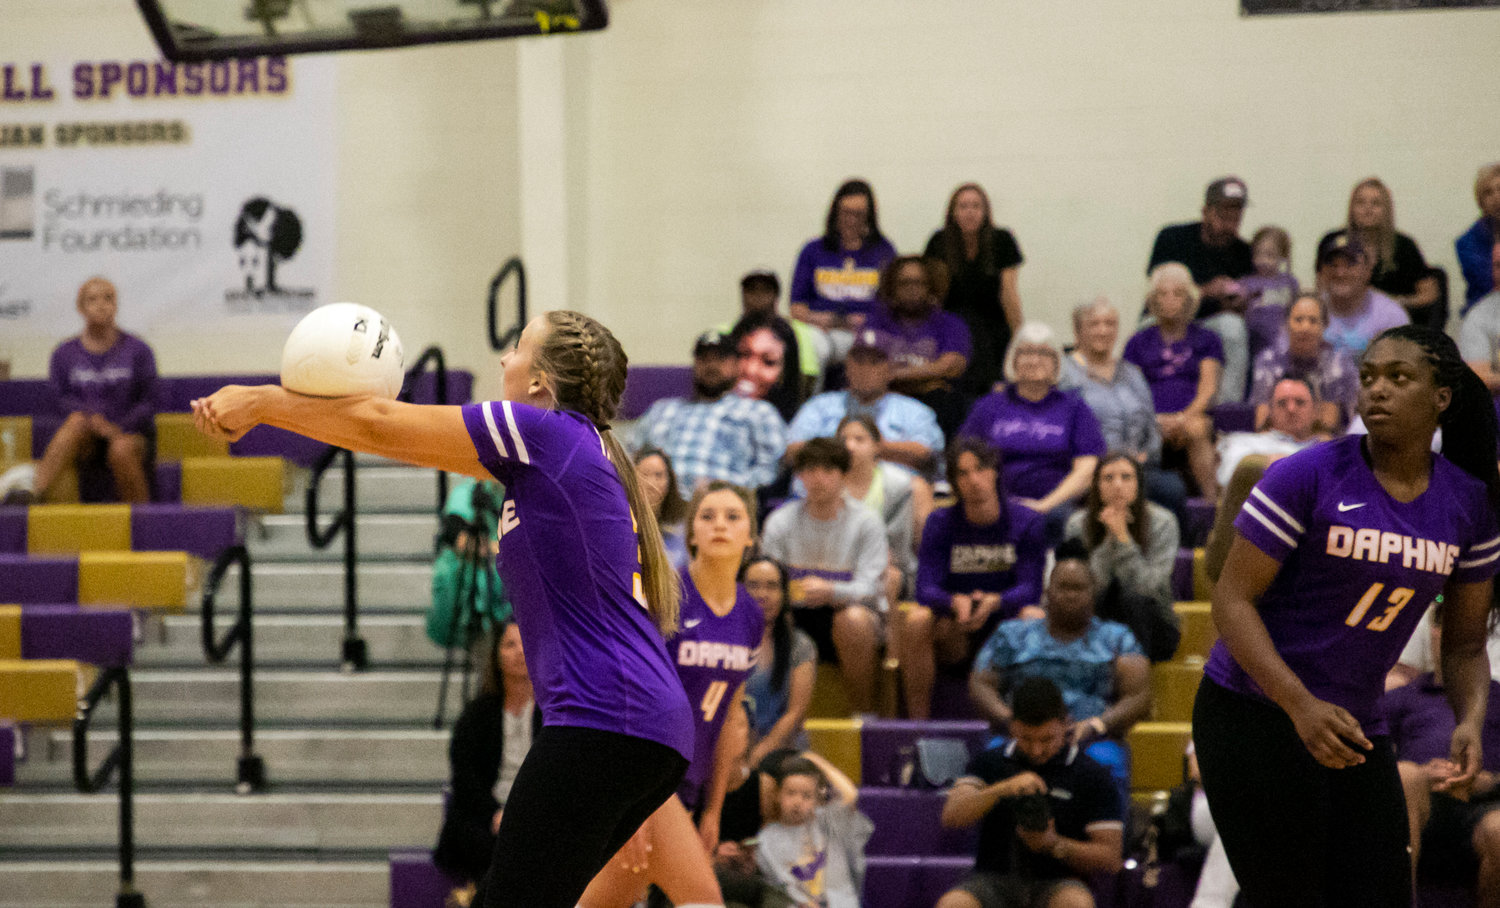 Daphne junior setter Lucy McCoy bumps a pass during the Trojans’ area match against the McGill-Toolen Yellow Jackets Tuesday, Sept. 20, at home. McCoy recently surpassed 1,000 assists as a Daphne Trojan.